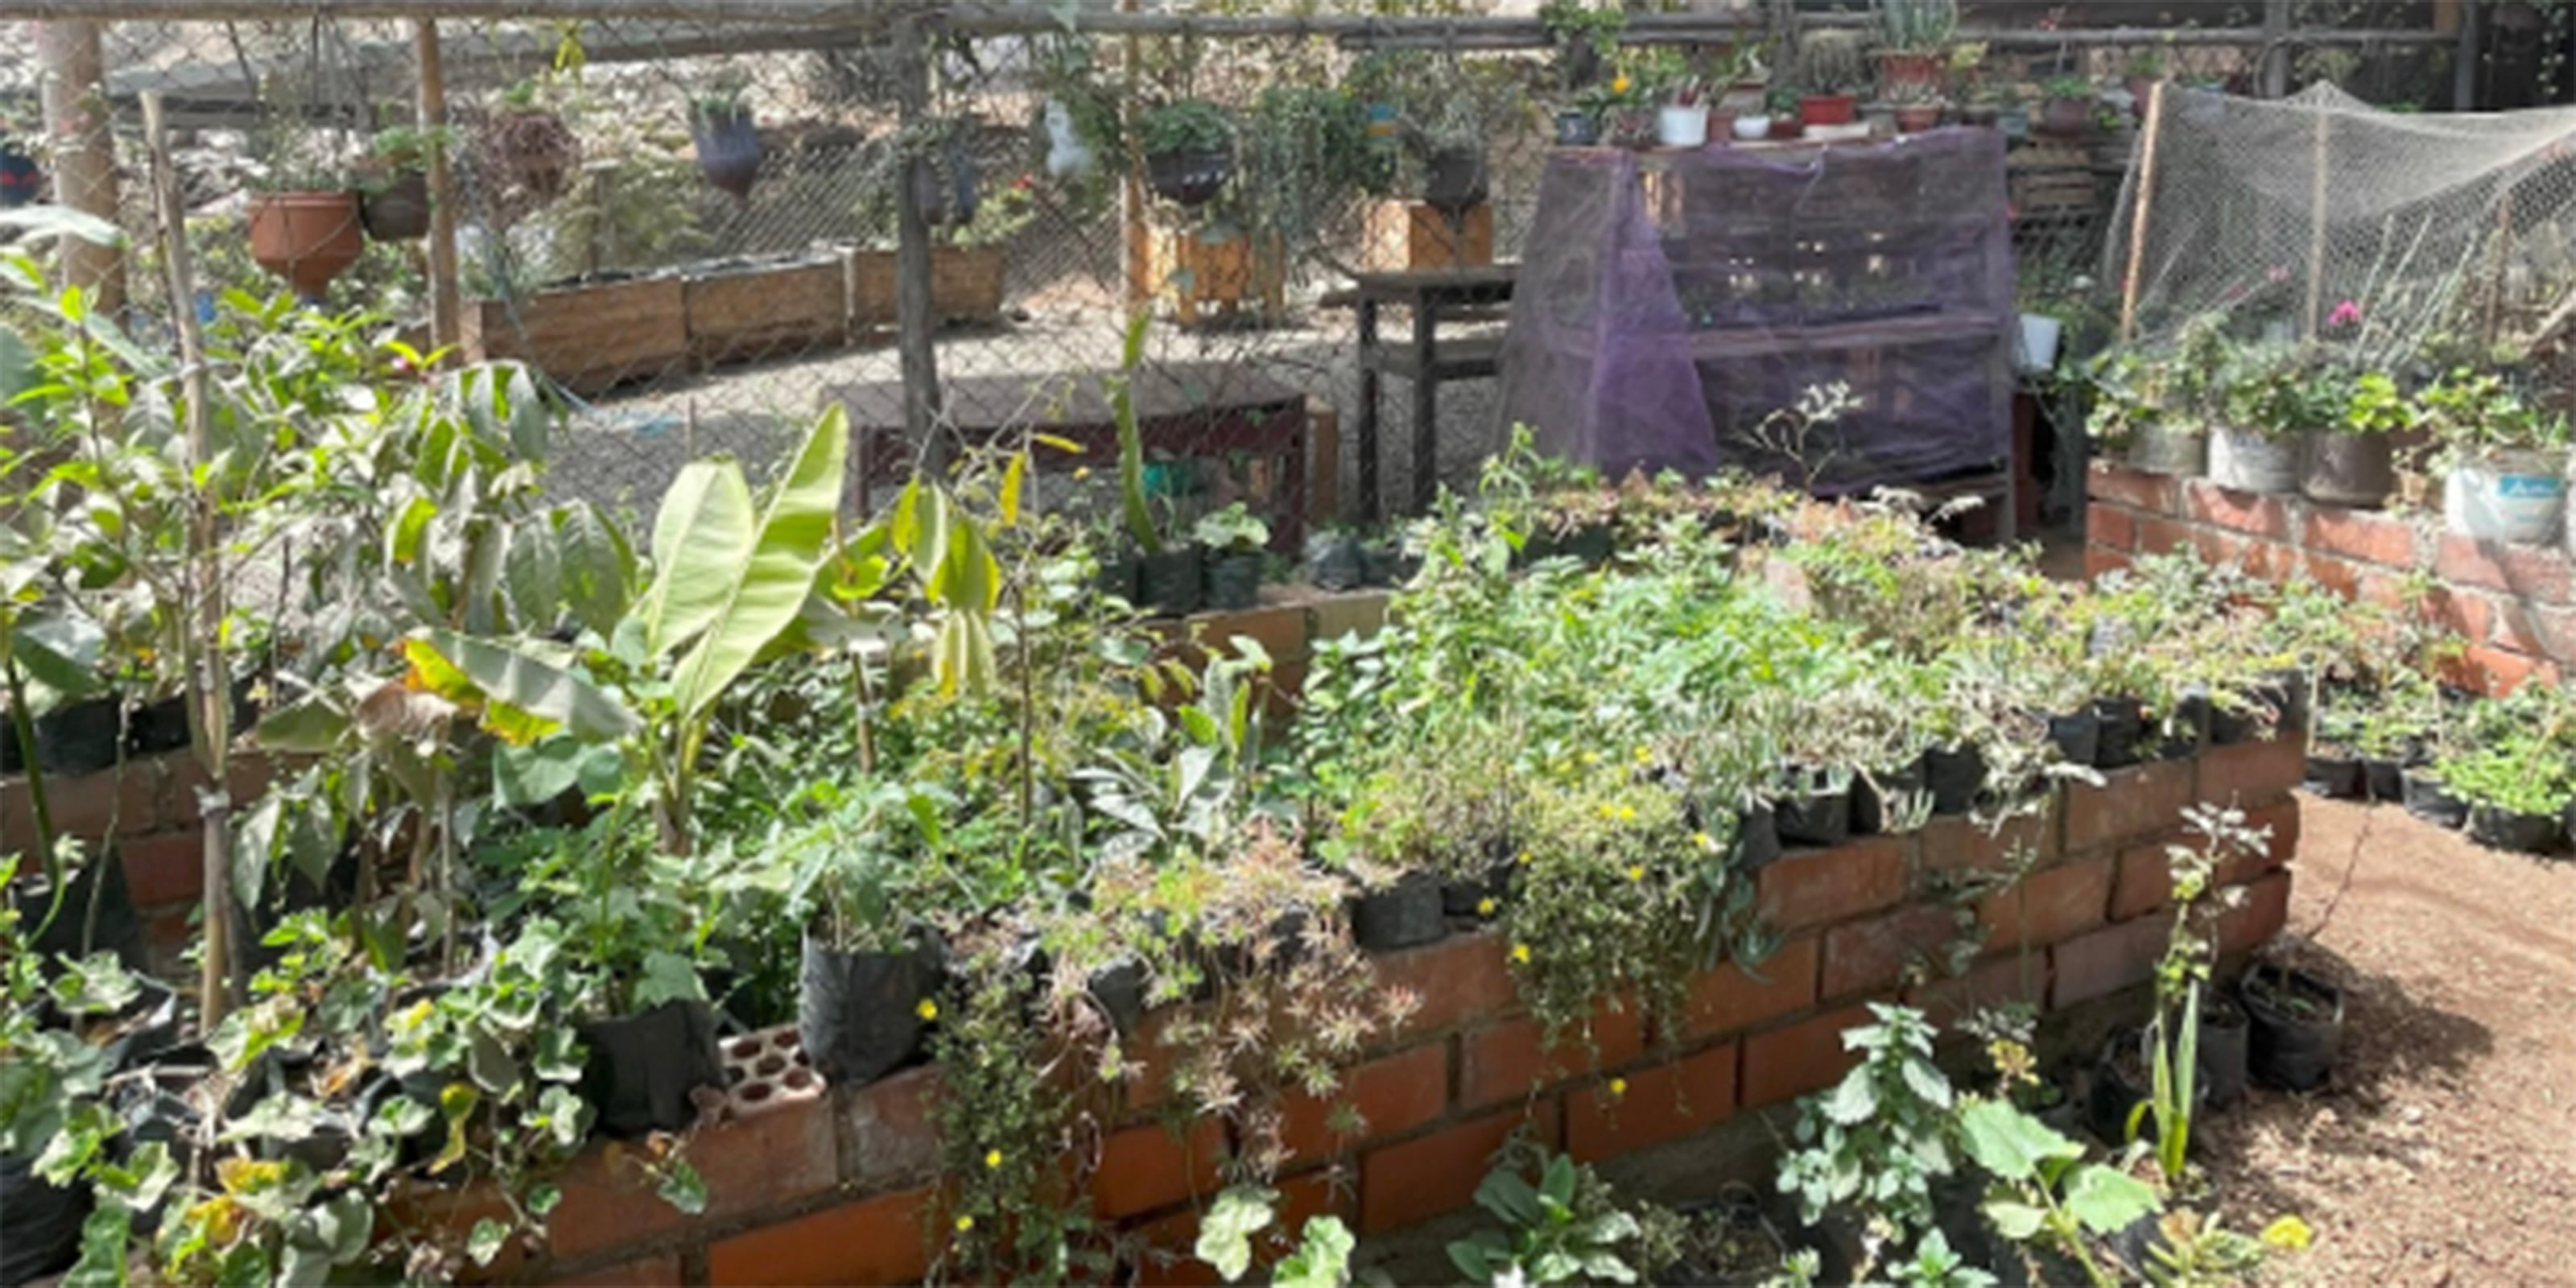 Plants and renewable resources at compost garden